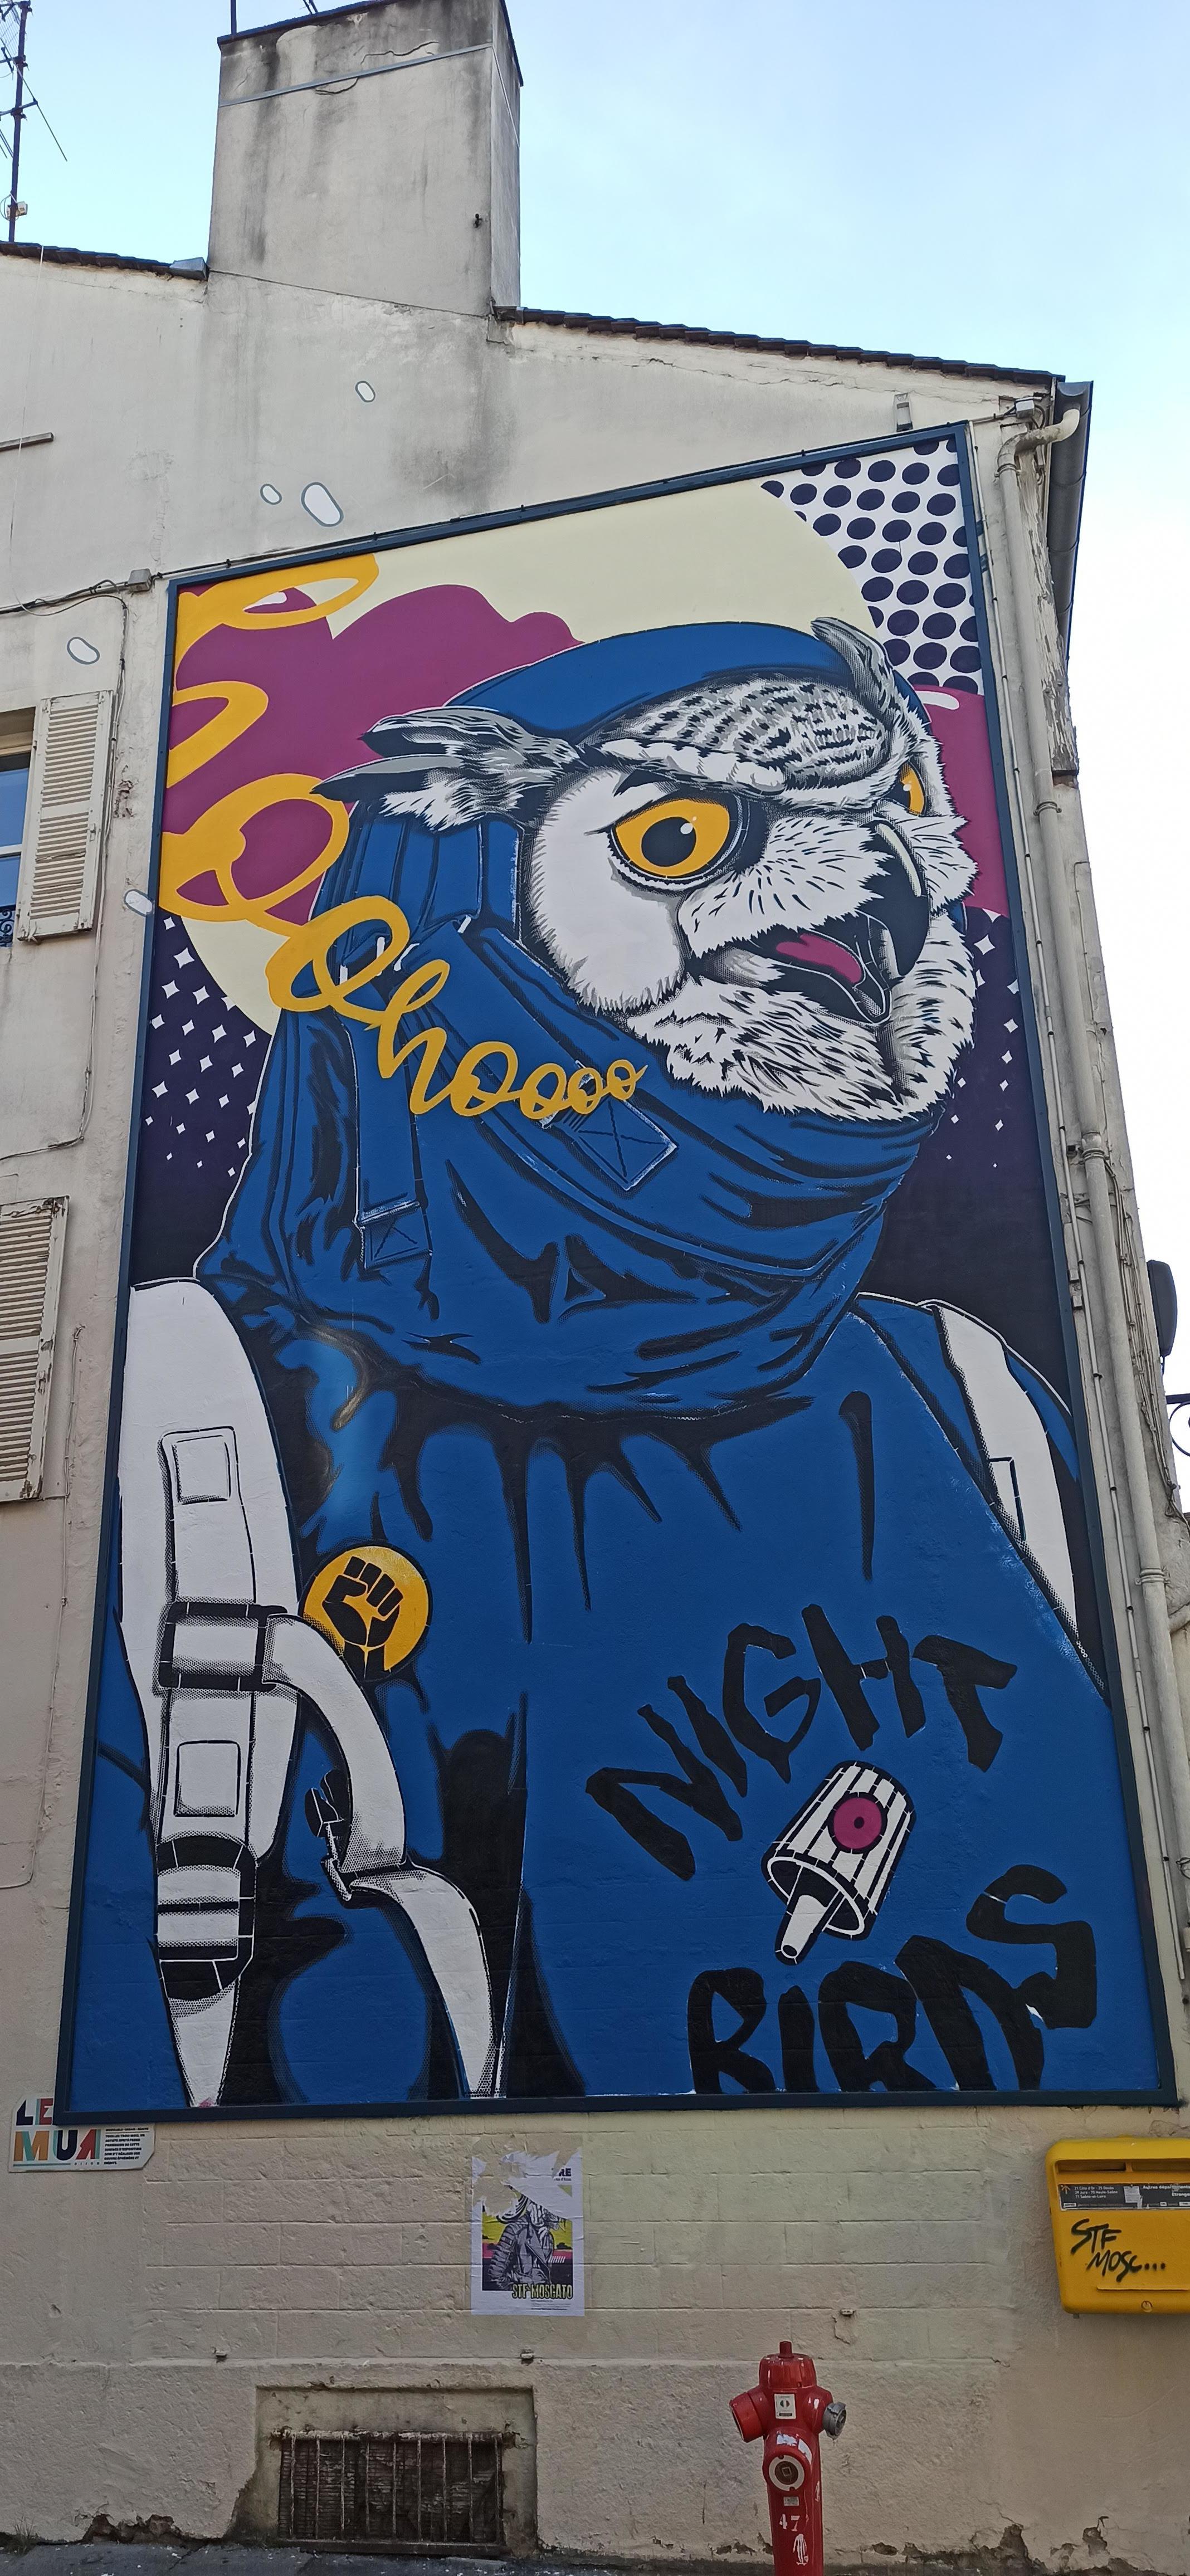 Graffiti 4931 Night birds by the artist Stephane Moscato captured by Rabot in Dijon France